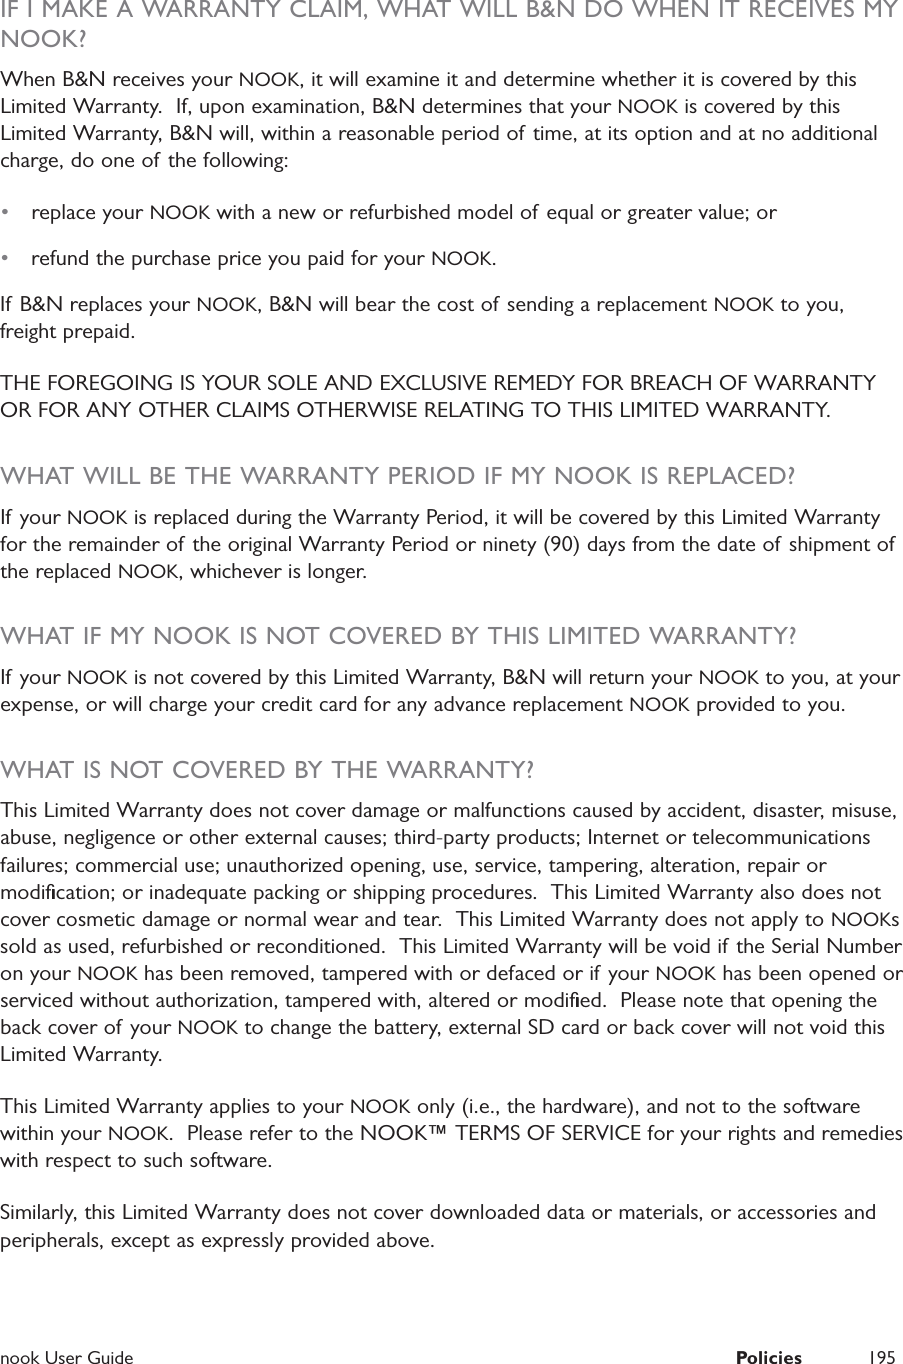  nook User Guide  Policies 195IF I MAKE A WARRANTY CLAIM, WHAT WILL B&amp;N DO WHEN IT RECEIVES MY NOOK?When B&amp;N receives your NOOK, it will examine it and determine whether it is covered by this Limited Warranty.  If, upon examination, B&amp;N determines that your NOOK is covered by this Limited Warranty, B&amp;N will, within a reasonable period of time, at its option and at no additional charge, do one of the following:•  replace your NOOK with a new or refurbished model of  equal or greater value; or•  refund the purchase price you paid for your NOOK. If B&amp;N replaces your NOOK, B&amp;N will bear the cost of sending a replacement NOOK to you, freight prepaid.  THE FOREGOING IS YOUR SOLE AND EXCLUSIVE REMEDY FOR BREACH OF WARRANTY OR FOR ANY OTHER CLAIMS OTHERWISE RELATING TO THIS LIMITED WARRANTY.  WHAT WILL BE THE WARRANTY PERIOD IF MY NOOK IS REPLACED?If your NOOK is replaced during the Warranty Period, it will be covered by this Limited Warranty for the remainder of the original Warranty Period or ninety (90) days from the date of shipment of the replaced NOOK, whichever is longer.WHAT IF MY NOOK IS NOT COVERED BY THIS LIMITED WARRANTY?If your NOOK is not covered by this Limited Warranty, B&amp;N will return your NOOK to you, at your expense, or will charge your credit card for any advance replacement NOOK provided to you.WHAT IS NOT COVERED BY THE WARRANTY?This Limited Warranty does not cover damage or malfunctions caused by accident, disaster, misuse, abuse, negligence or other external causes; third-party products; Internet or telecommunications failures; commercial use; unauthorized opening, use, service, tampering, alteration, repair or modiﬁcation; or inadequate packing or shipping procedures.  This Limited Warranty also does not cover cosmetic damage or normal wear and tear.  This Limited Warranty does not apply to NOOKs sold as used, refurbished or reconditioned.  This Limited Warranty will be void if the Serial Number on your NOOK has been removed, tampered with or defaced or if your NOOK has been opened or serviced without authorization, tampered with, altered or modiﬁed.  Please note that opening the back cover of your NOOK to change the battery, external SD card or back cover will not void this Limited Warranty.  This Limited Warranty applies to your NOOK only (i.e., the hardware), and not to the software within your NOOK.  Please refer to the NOOK™ TERMS OF SERVICE for your rights and remedies with respect to such software.  Similarly, this Limited Warranty does not cover downloaded data or materials, or accessories and peripherals, except as expressly provided above. 